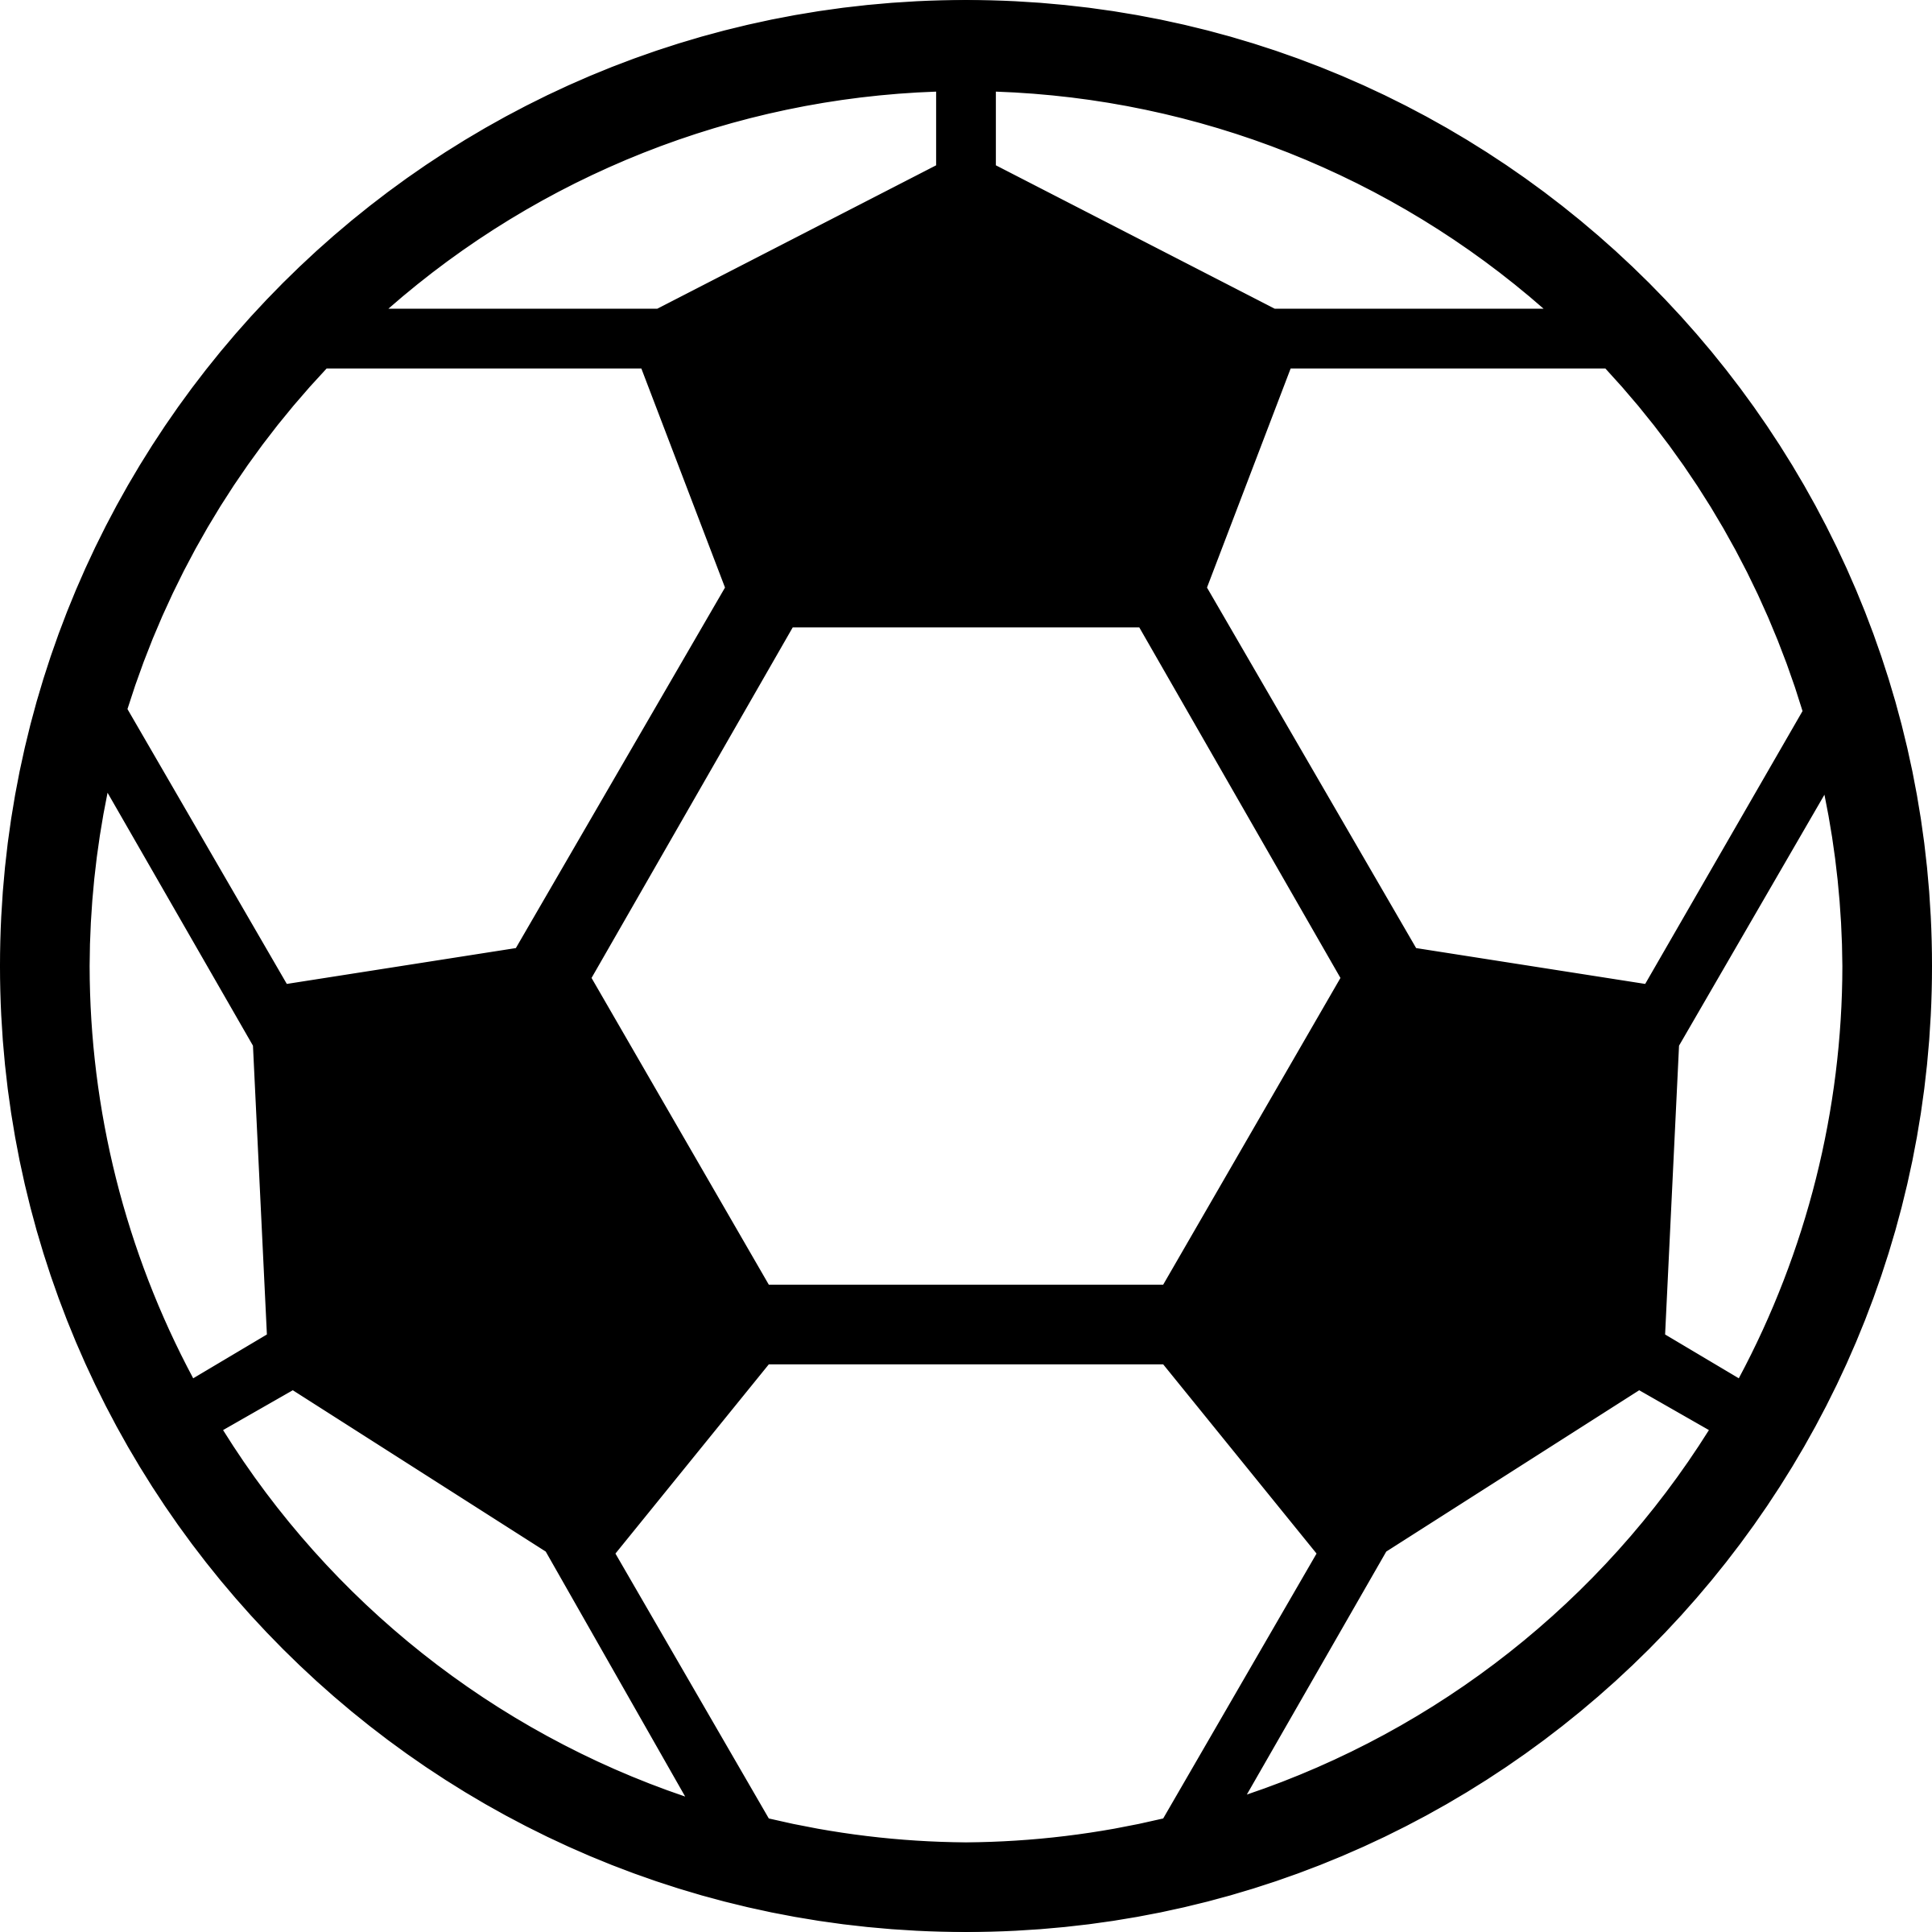 Clipart soccer ball clipartcow - Cliparting.com